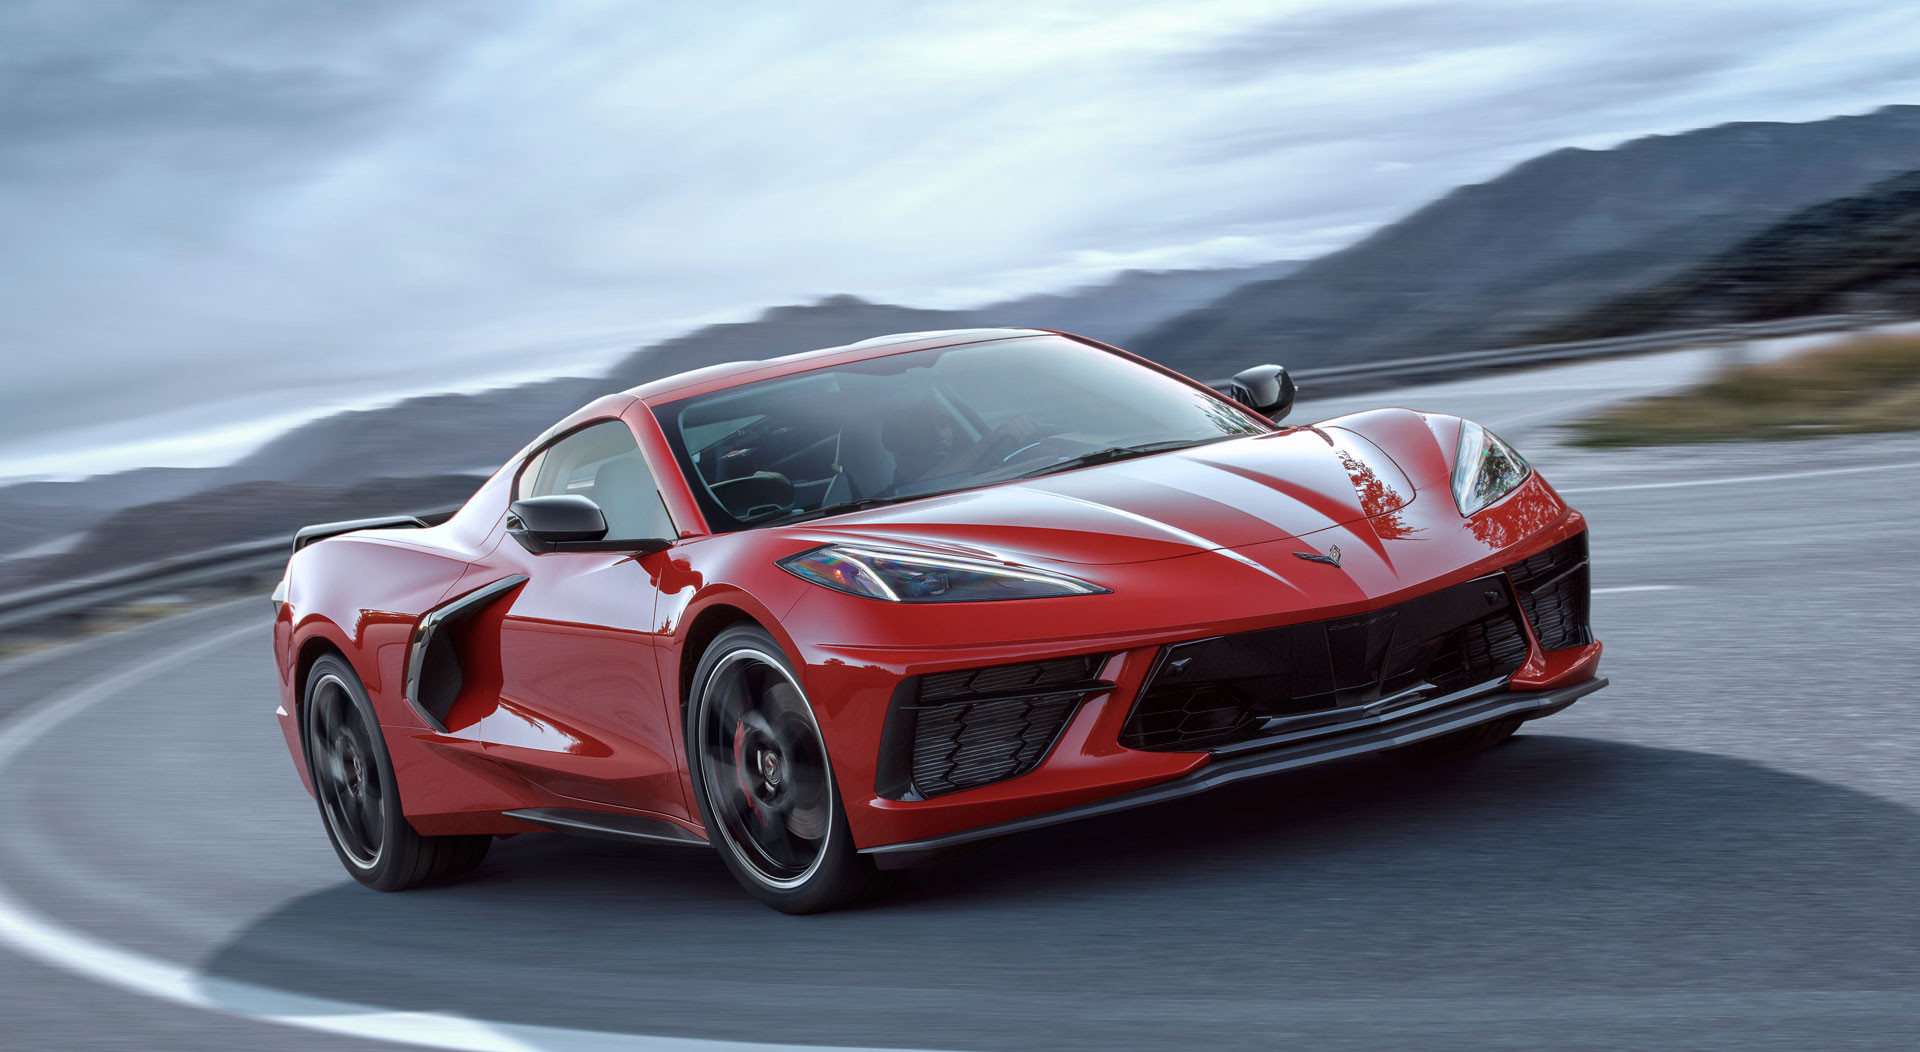 2020 Chevy Corvette on the road